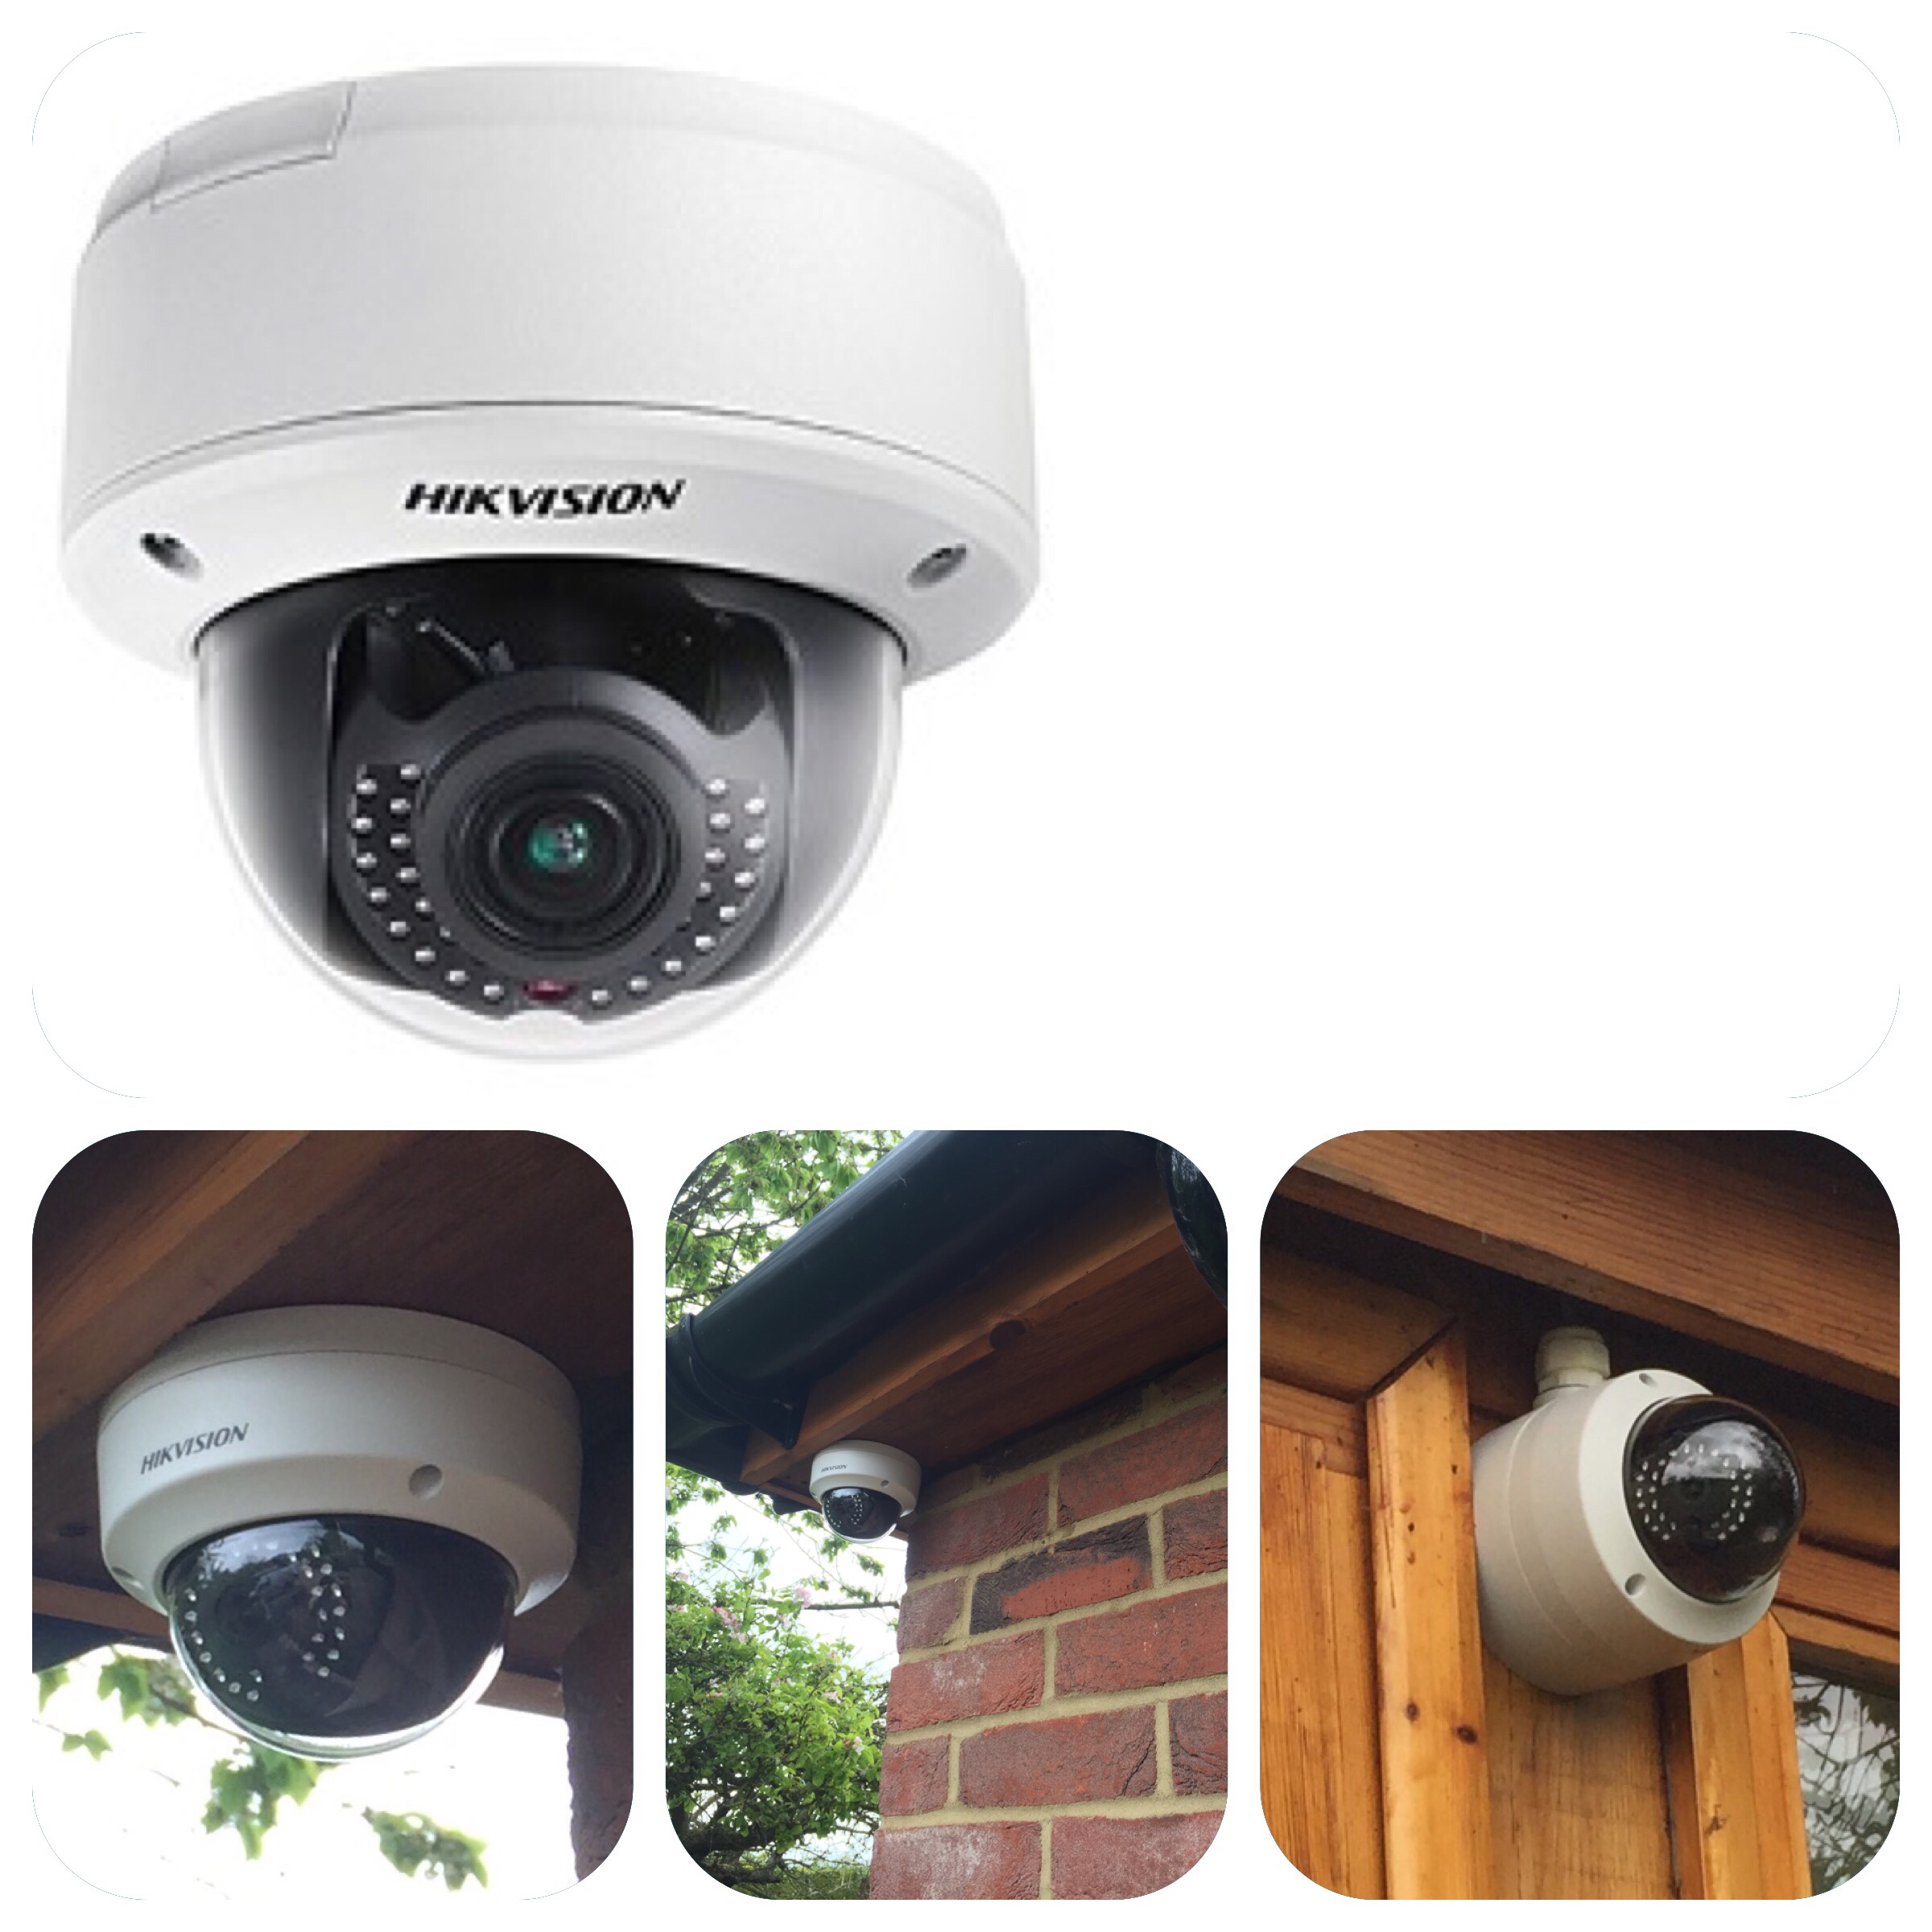 HIKVIsion network CCTV cameras can be wall mounted or ceiling mounted.